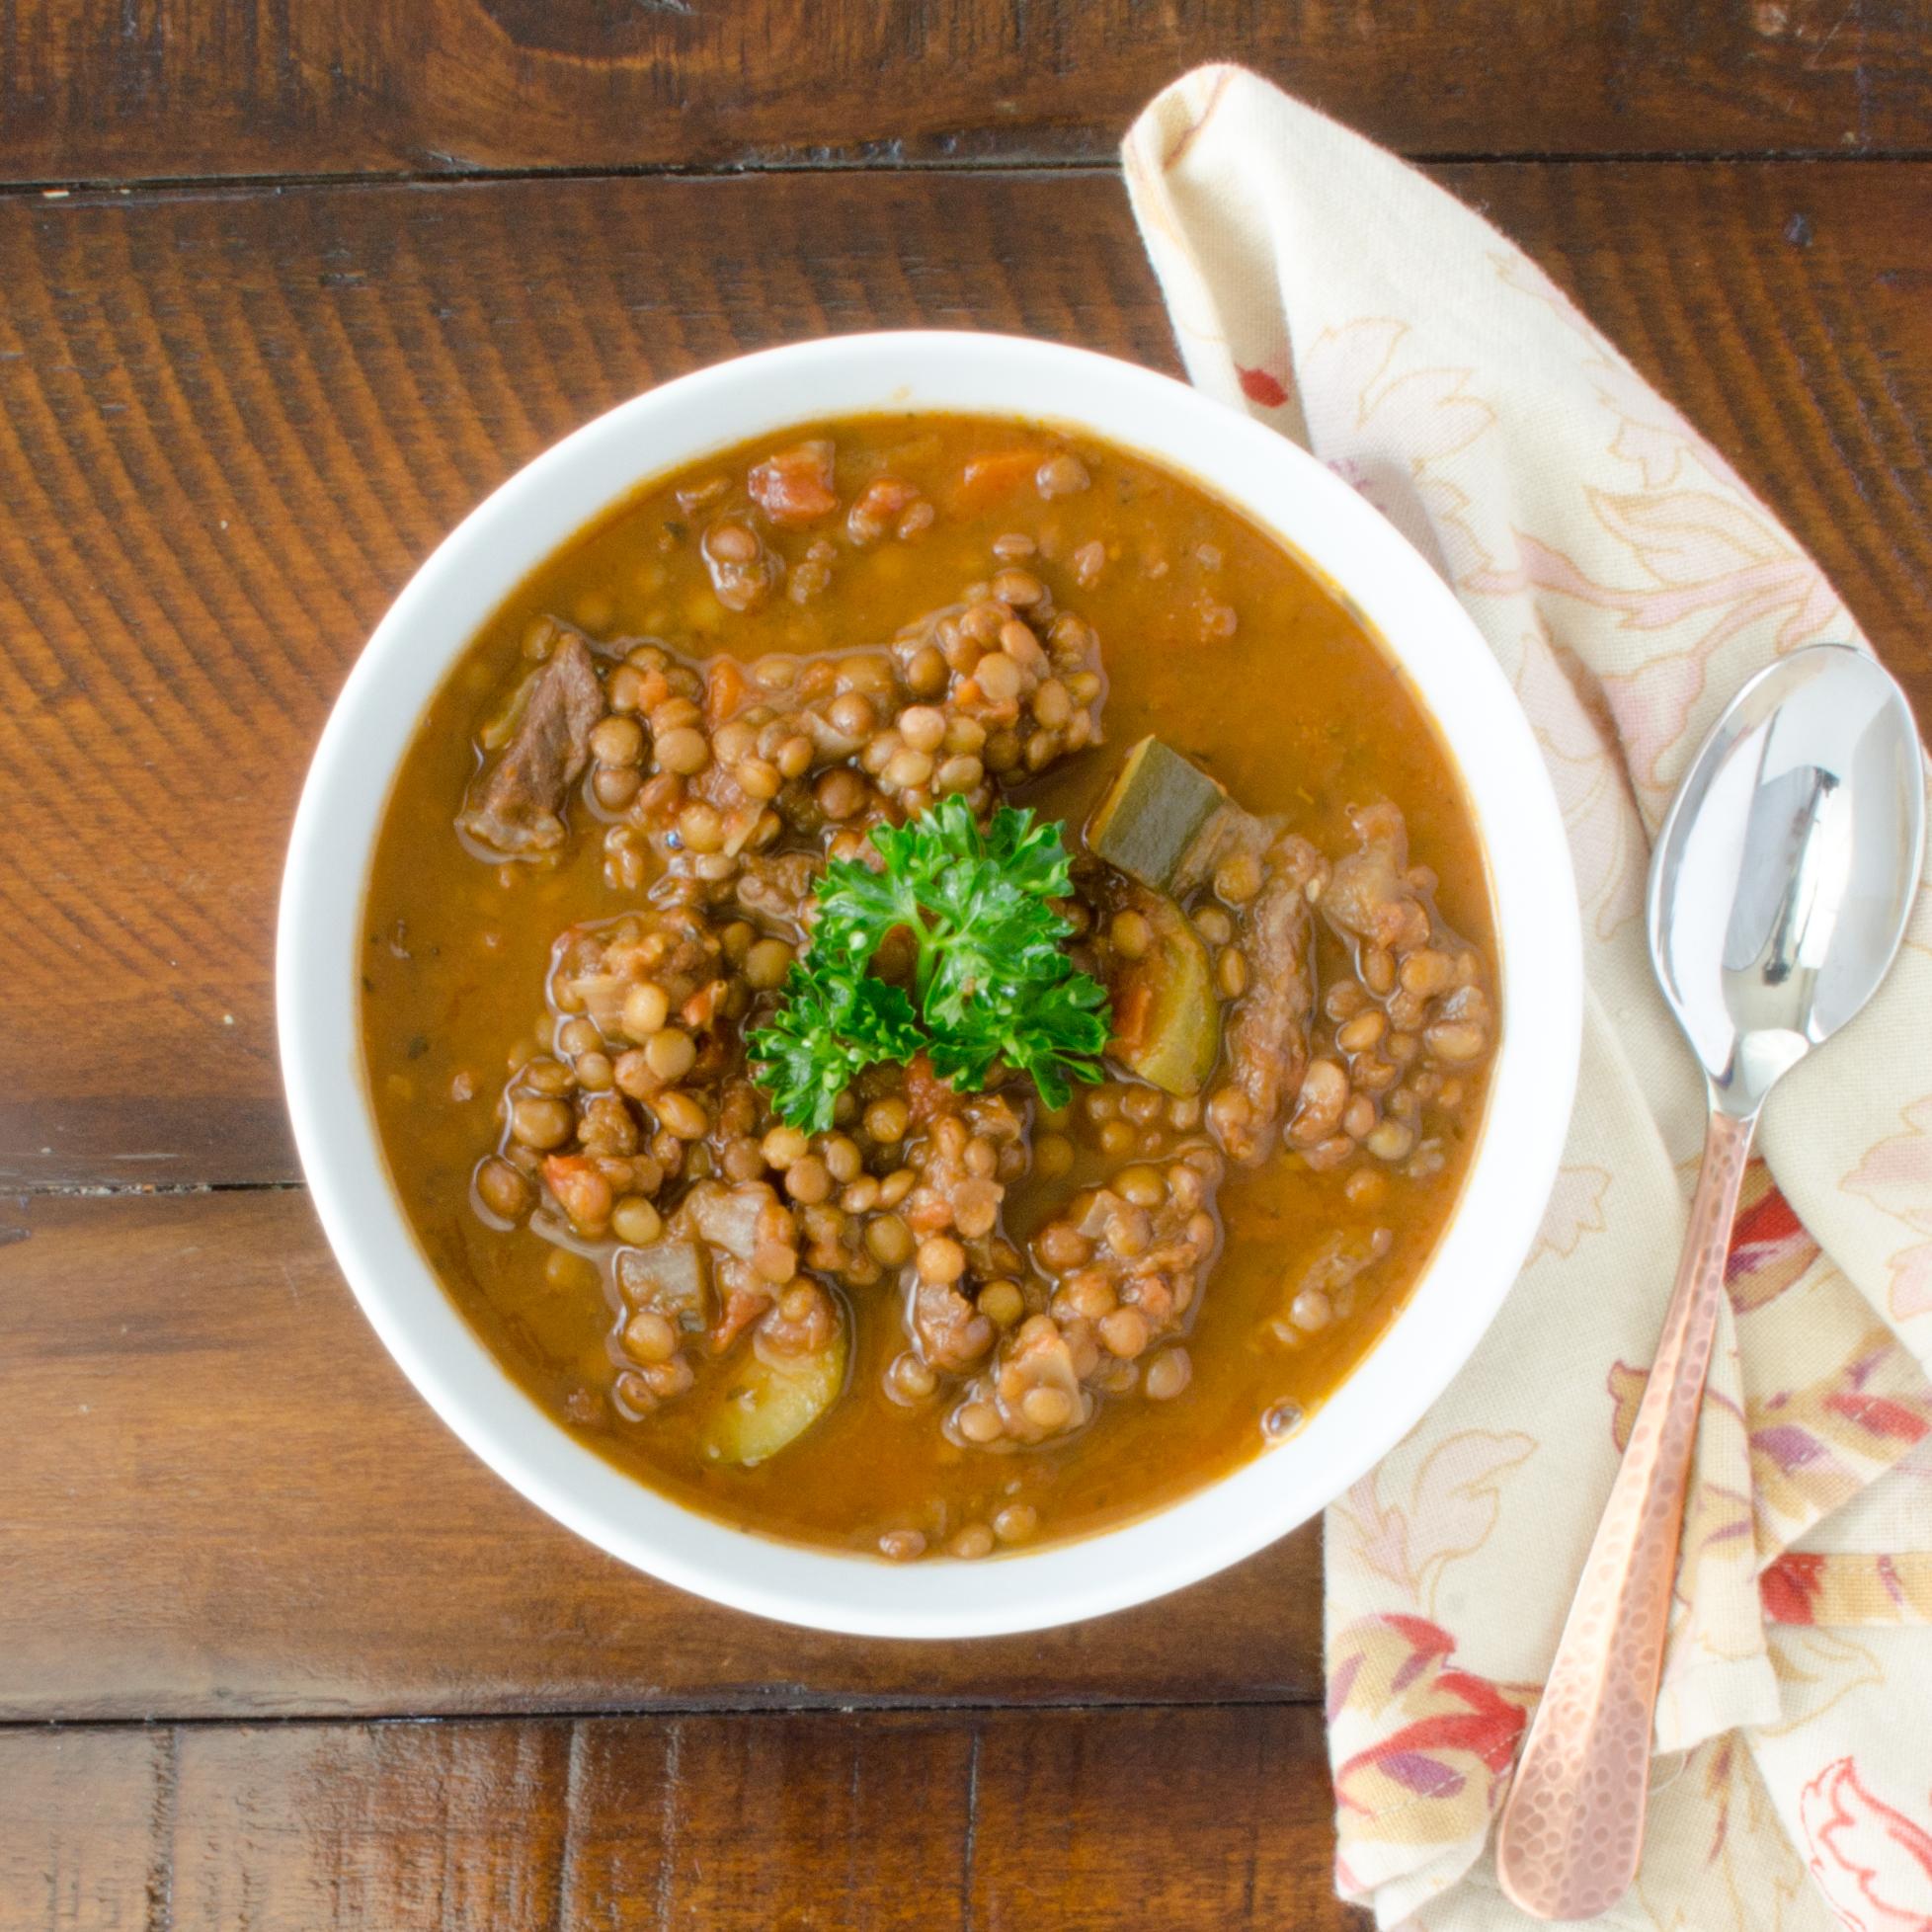 Hearty Lentil and Zucchini Stew Recipe for a Cozy Evening